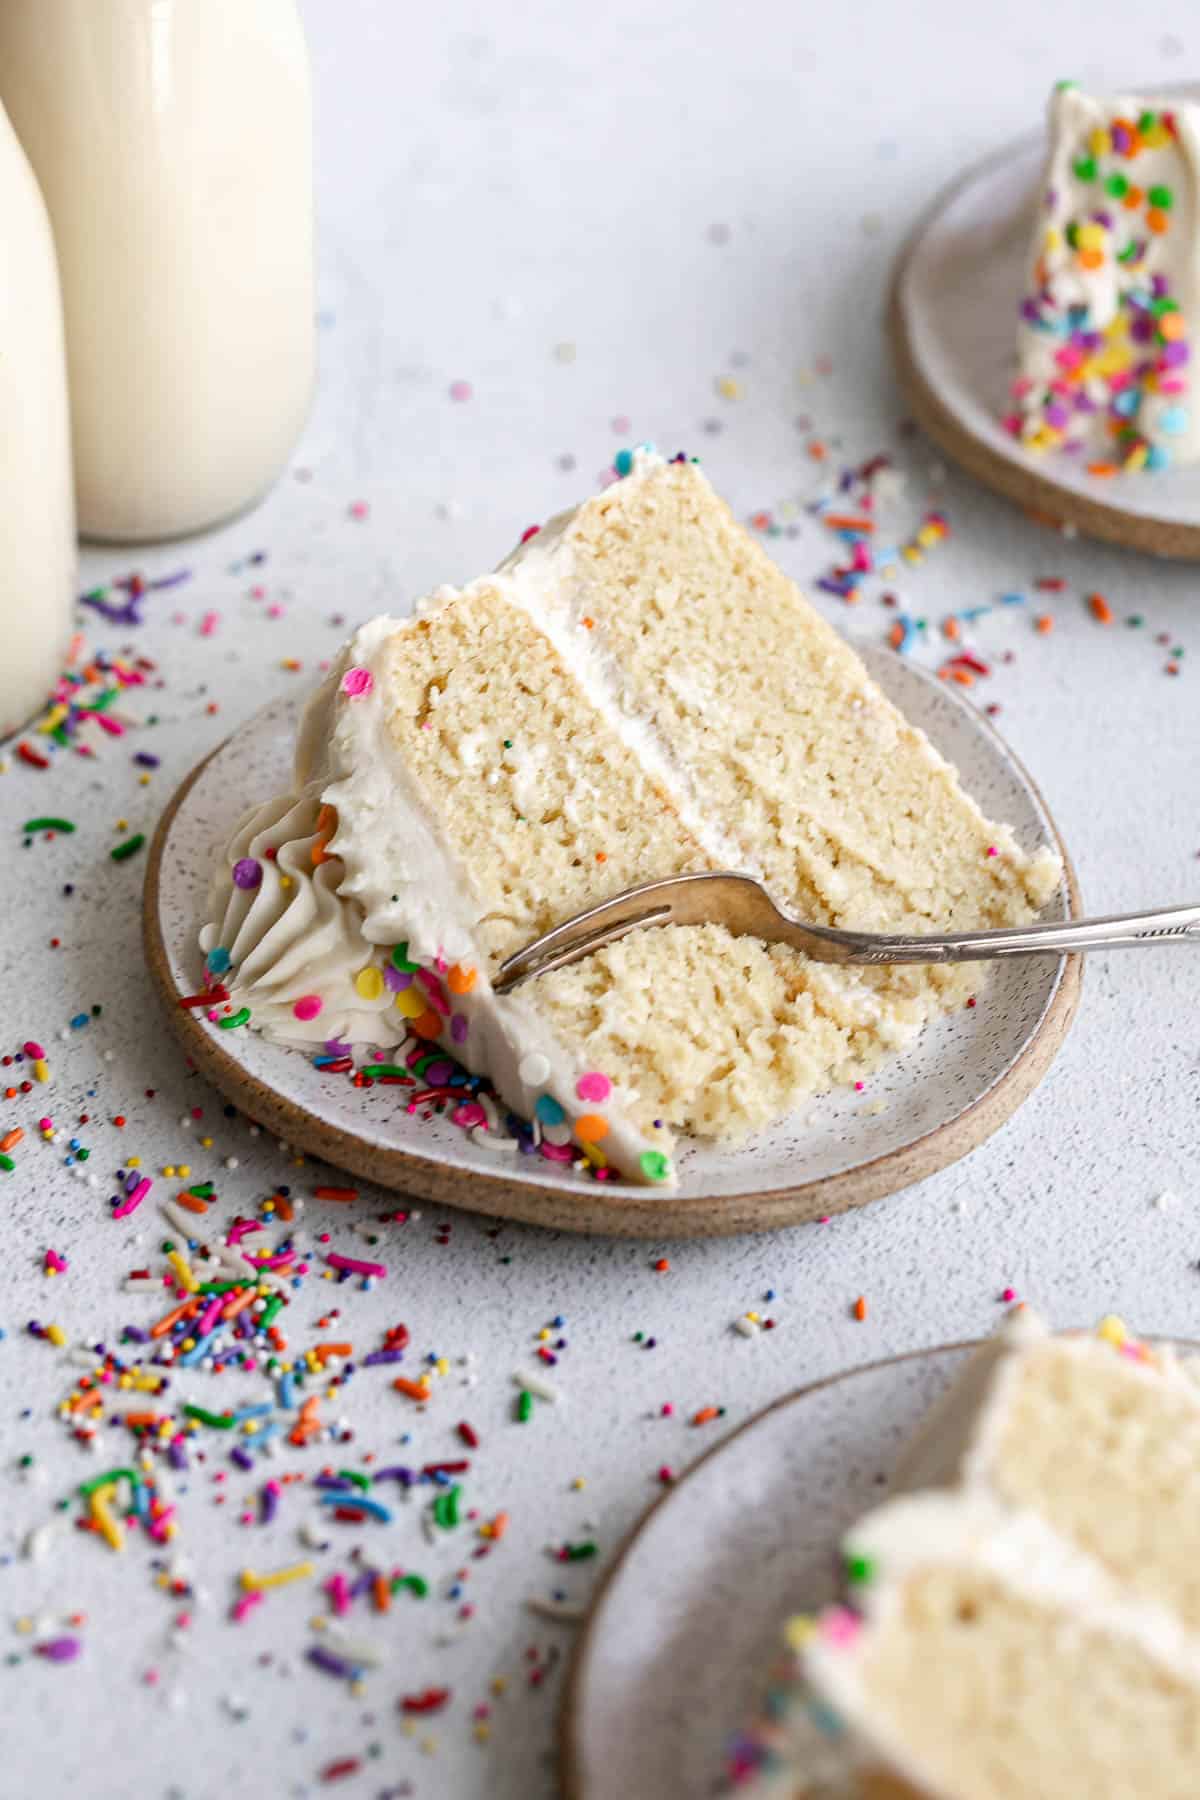 three slices of gluten free vanilla cake on plate with a fork on the side